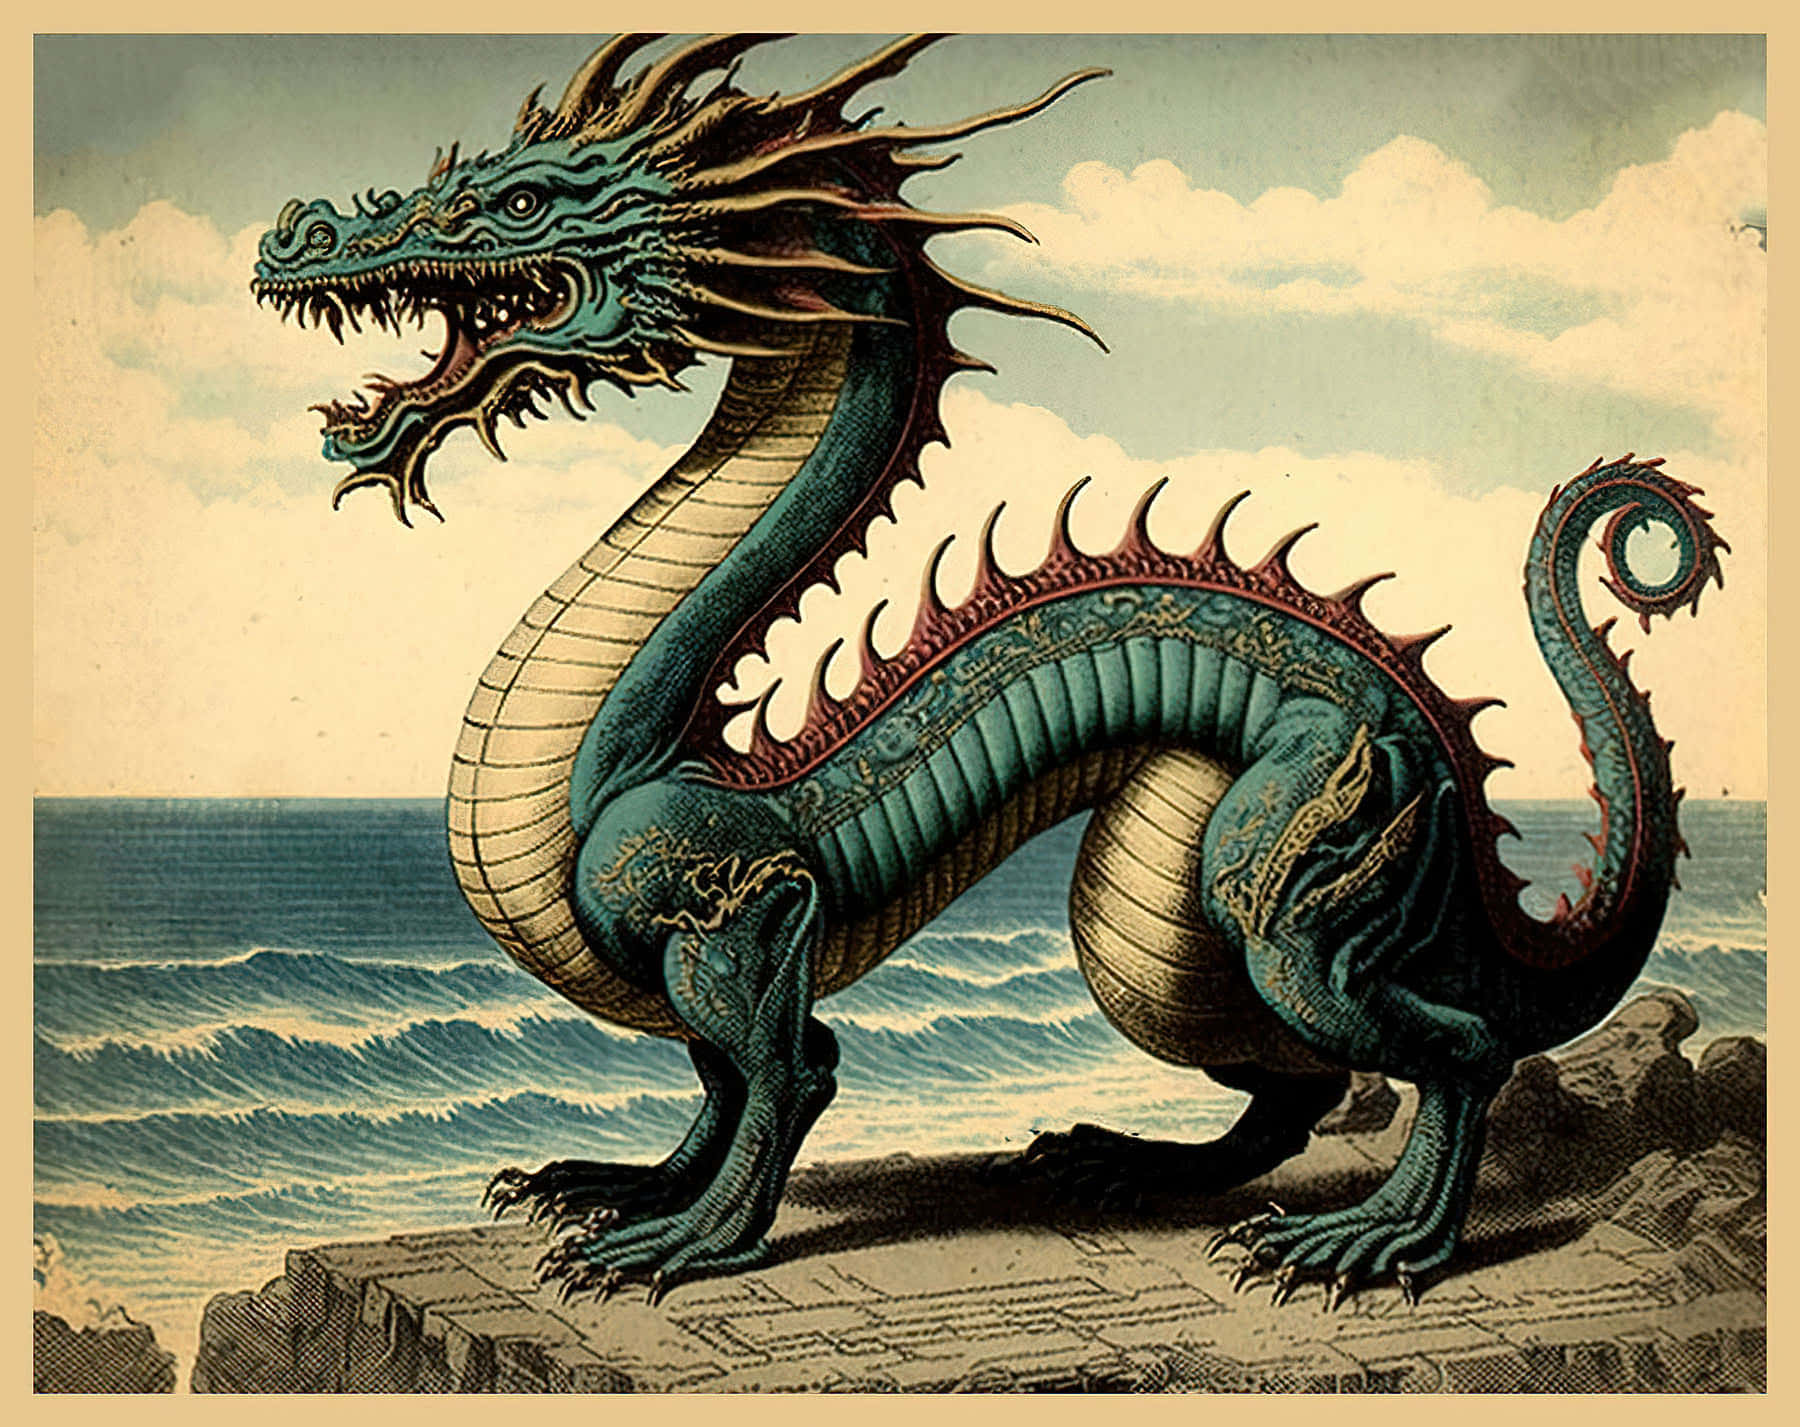 "The Magnificent Dragon"